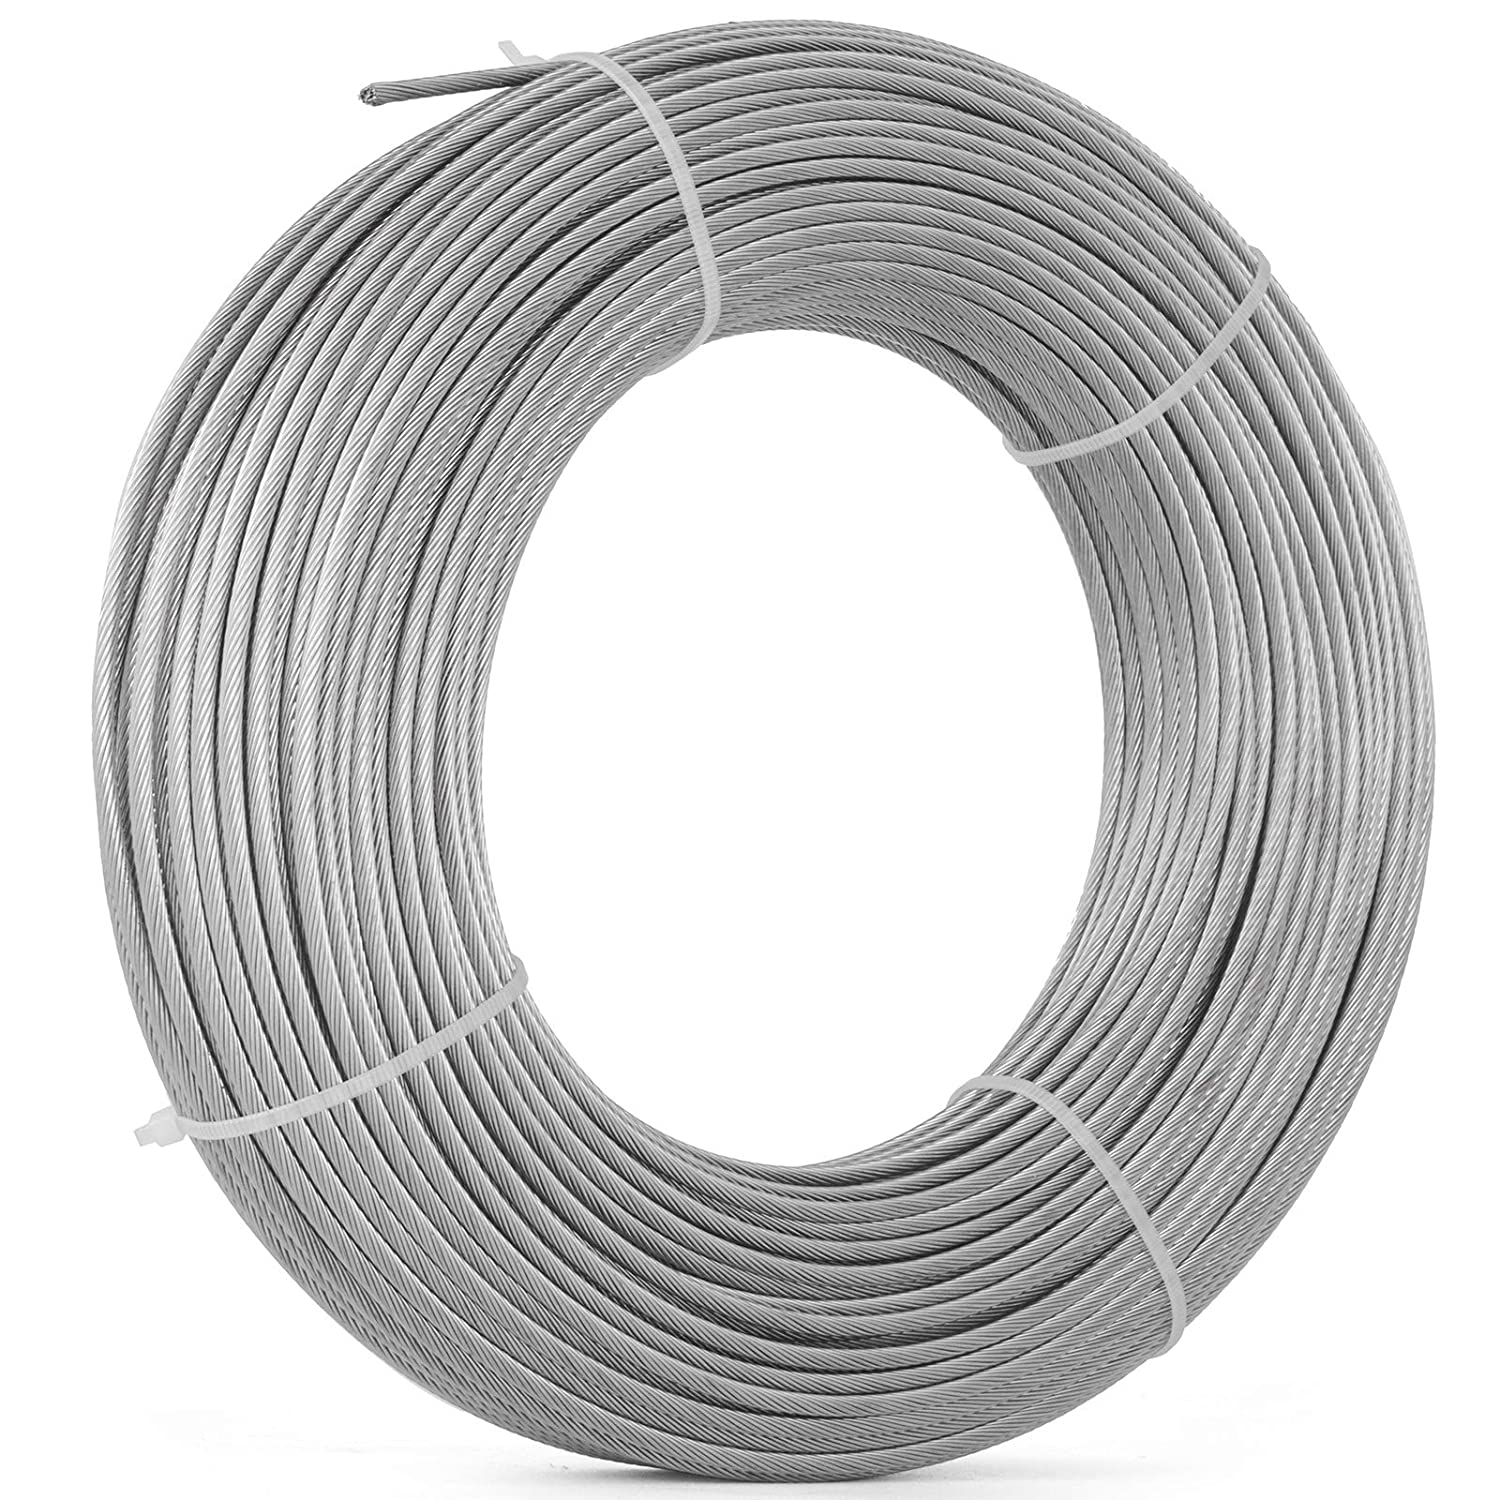 High quality galvanized steel wire rope for motorcycle 2.3 / 2.0 / 1.8mm clutch cable inner wire